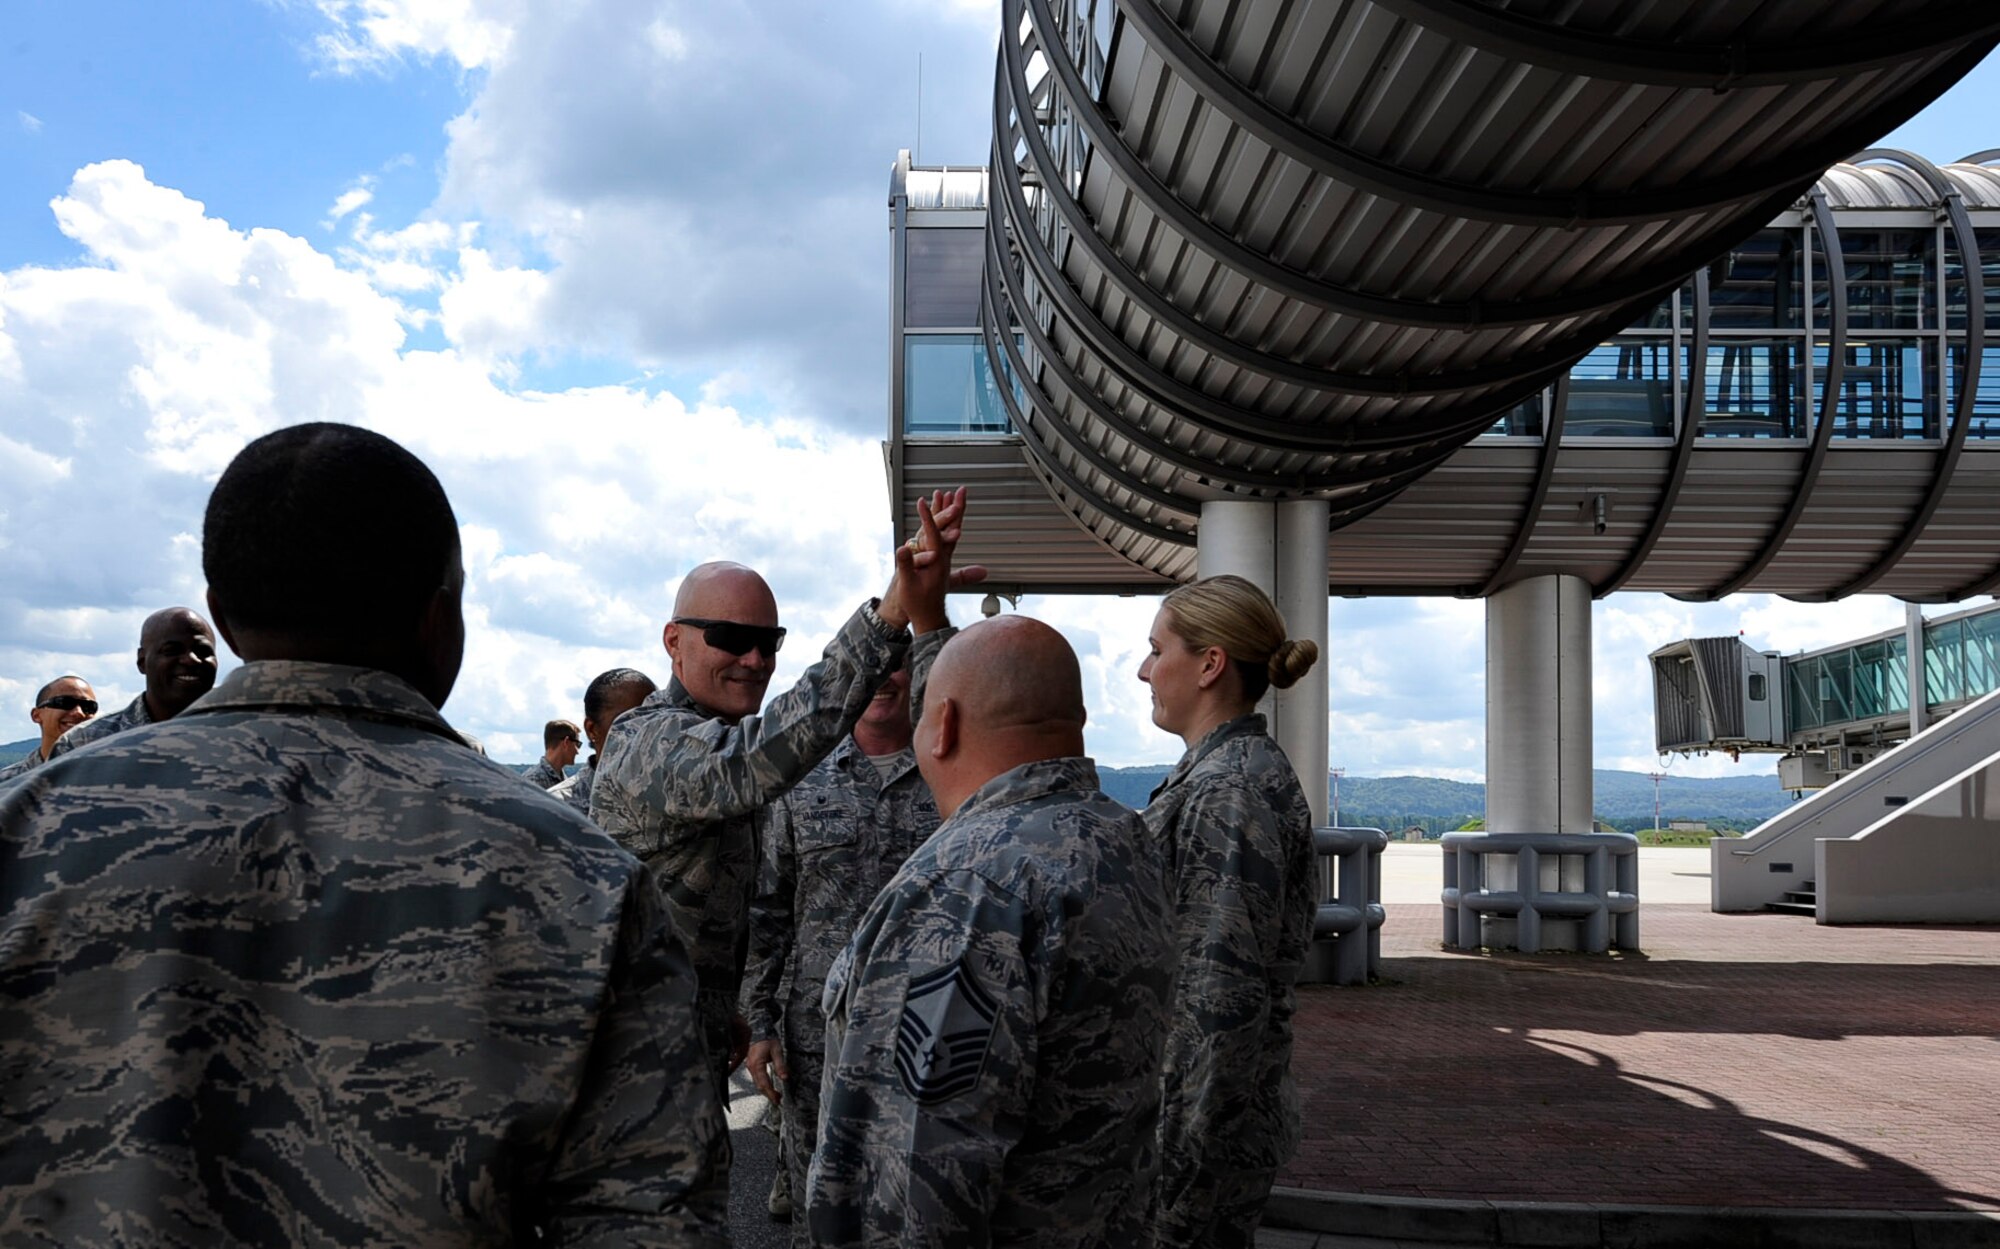 U.S. Air Force Gen. Carlton “Dewey” Everhart II, commander, Air Mobility Command, visits the 521st Air Mobility Operations Wing during his immersion tour on Ramstein Air Base, Germany, Aug. 14, 2017.